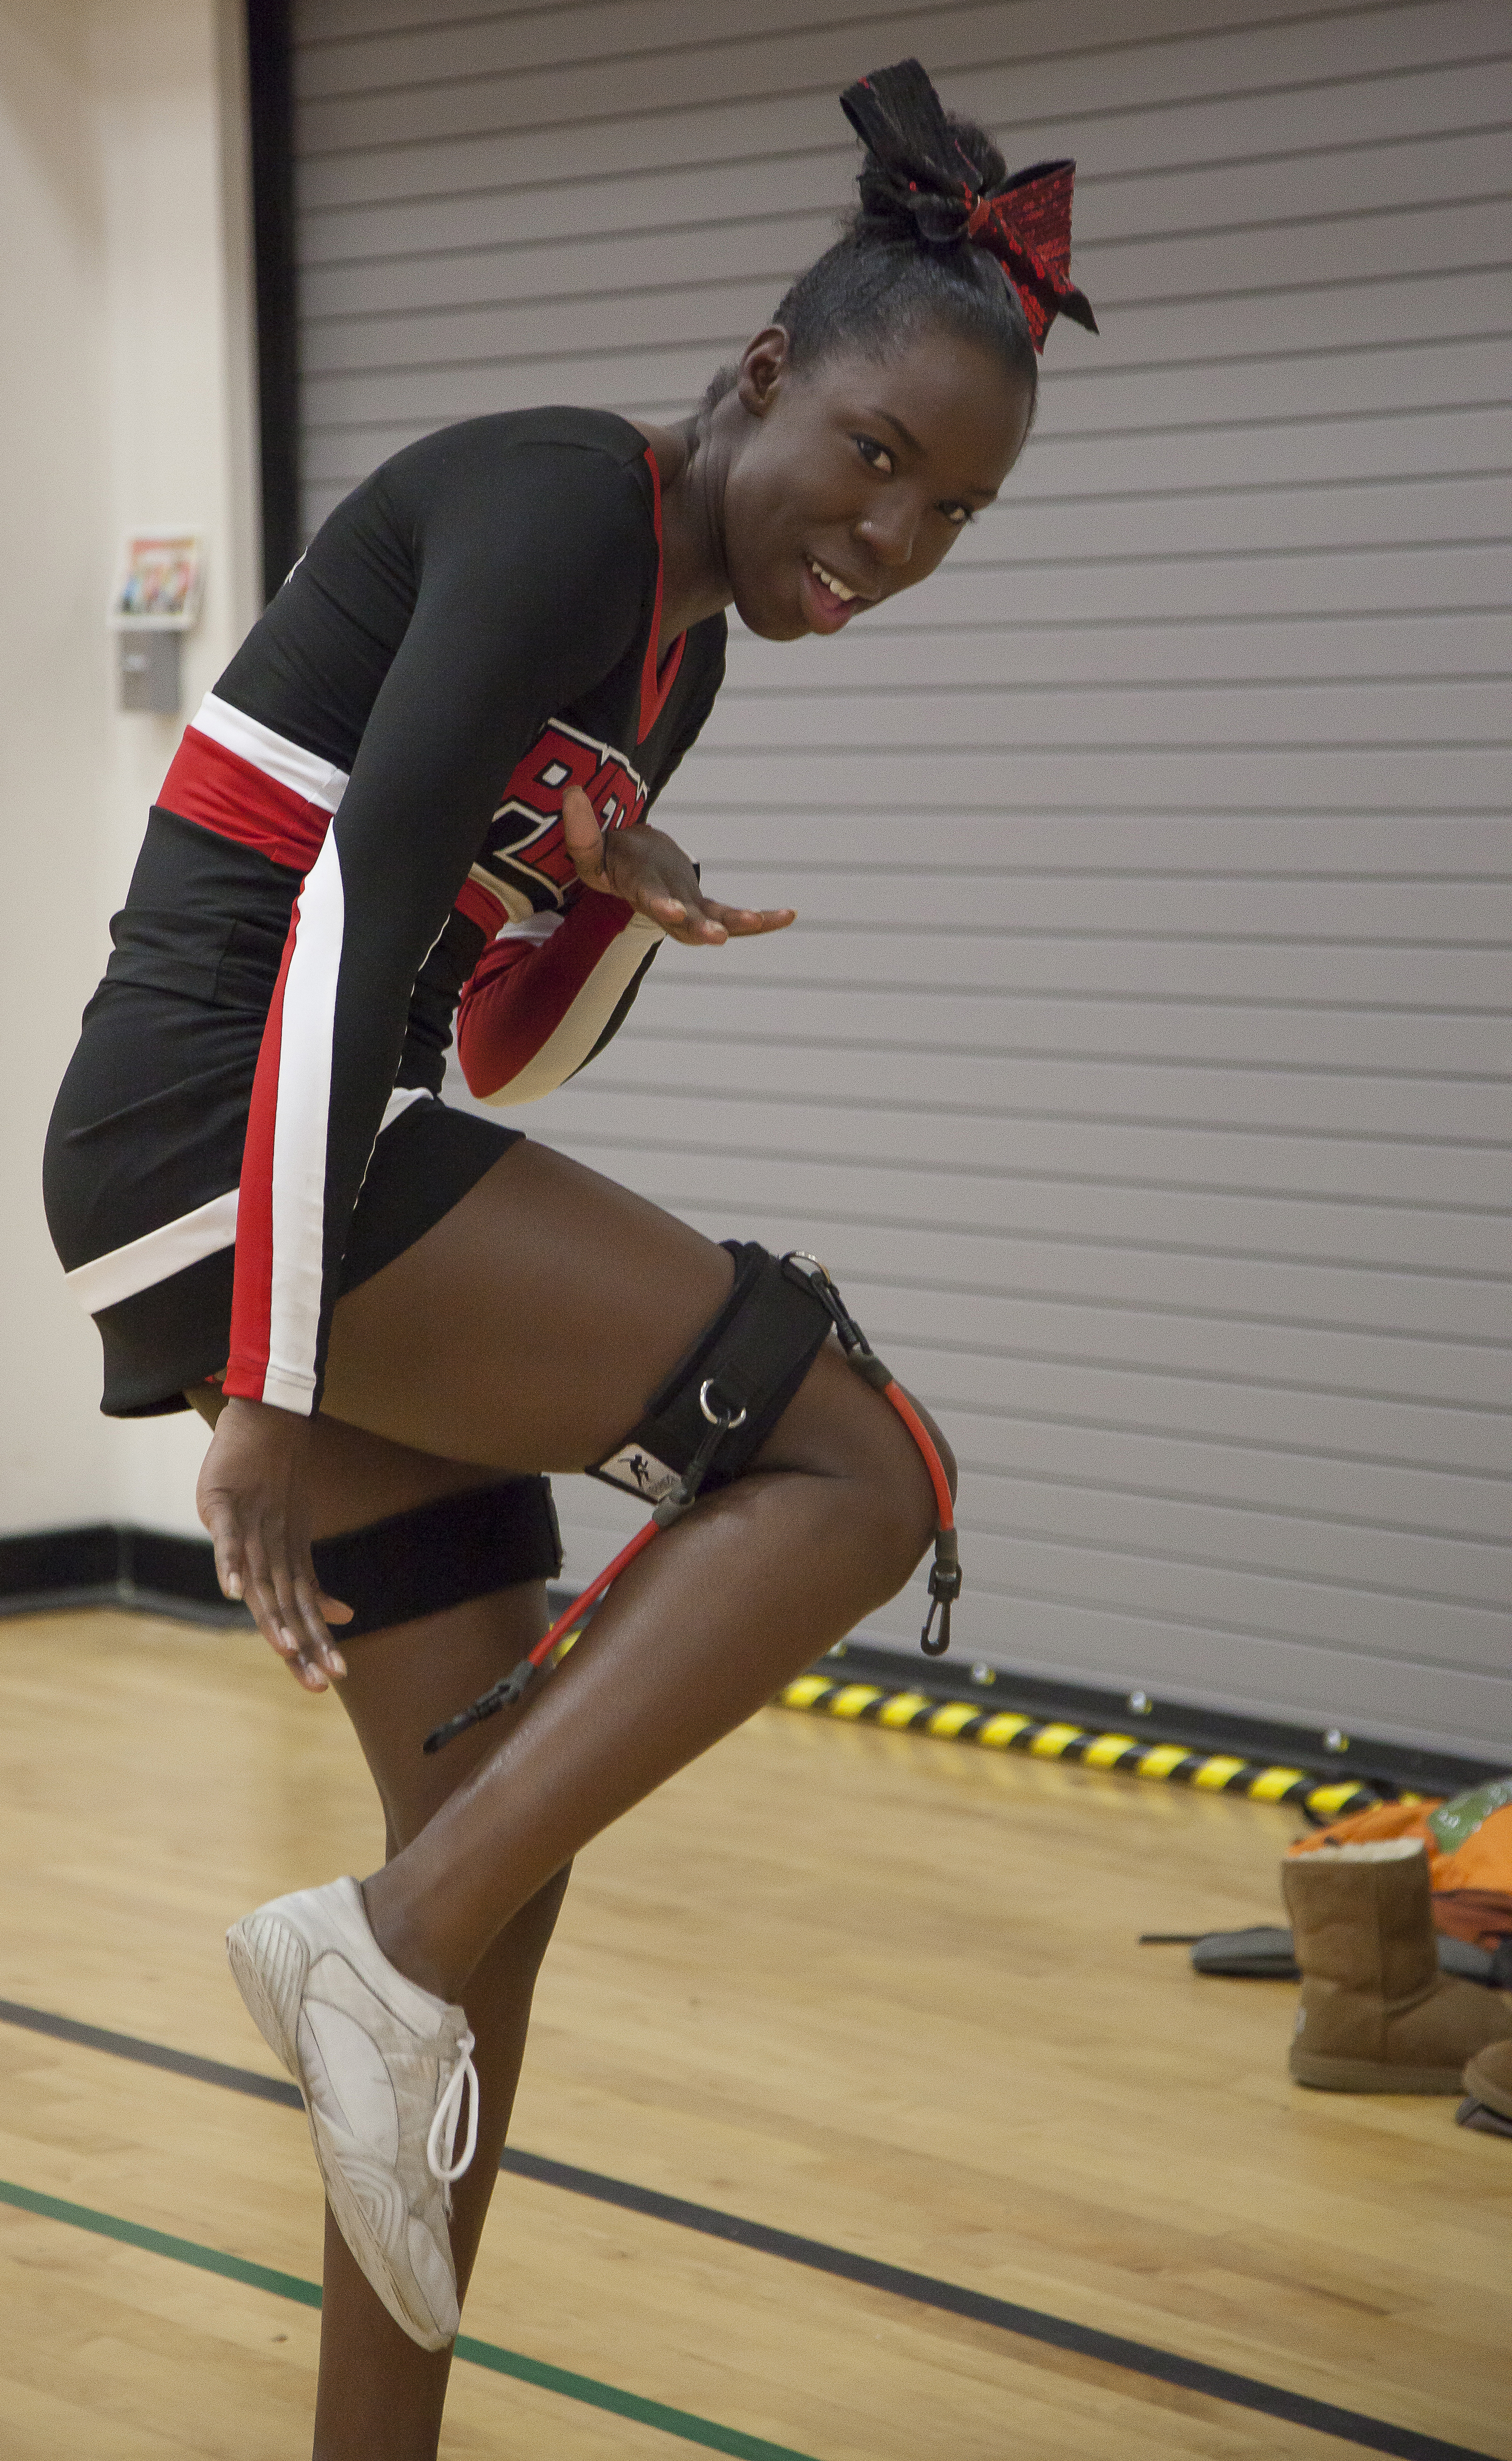  Rushanda DuQuesnay poses with her K-bands wrapped around her leg during a practice session inside the North Gym on Sunday March, 1, 2015. The K-bands help strengthen leg muscles. Woodland Hills, Calif.  Read the full story&nbsp; here  